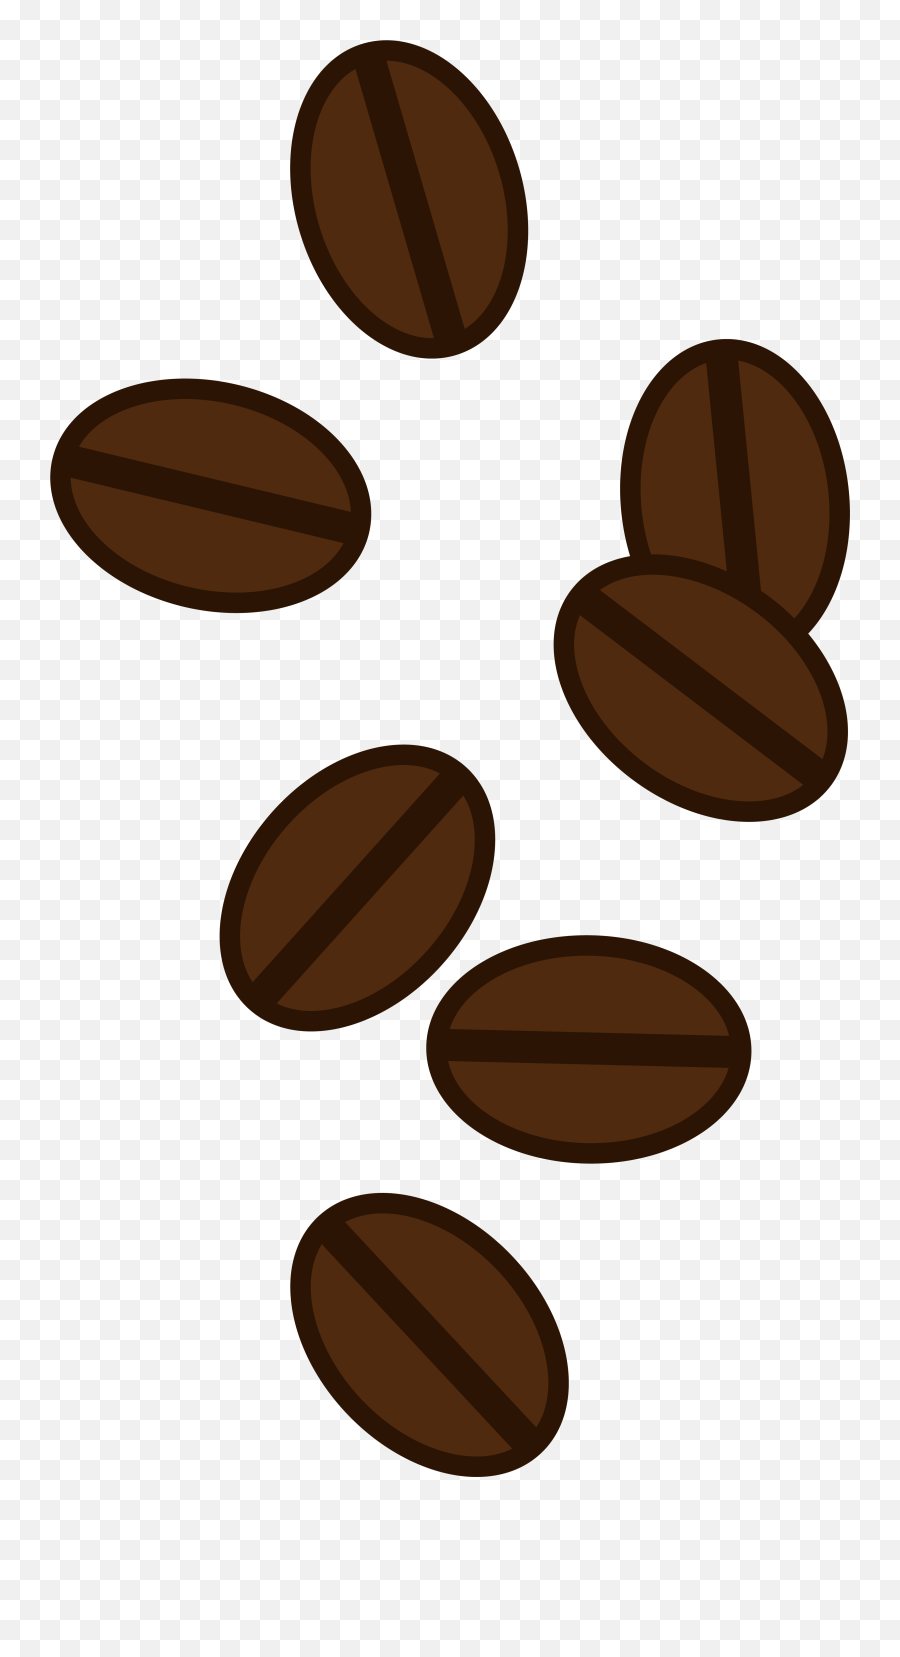 Coffee Beans Clipart - Transparent Background Coffee Beans Clipart Emoji,Coffee Bean Emoji